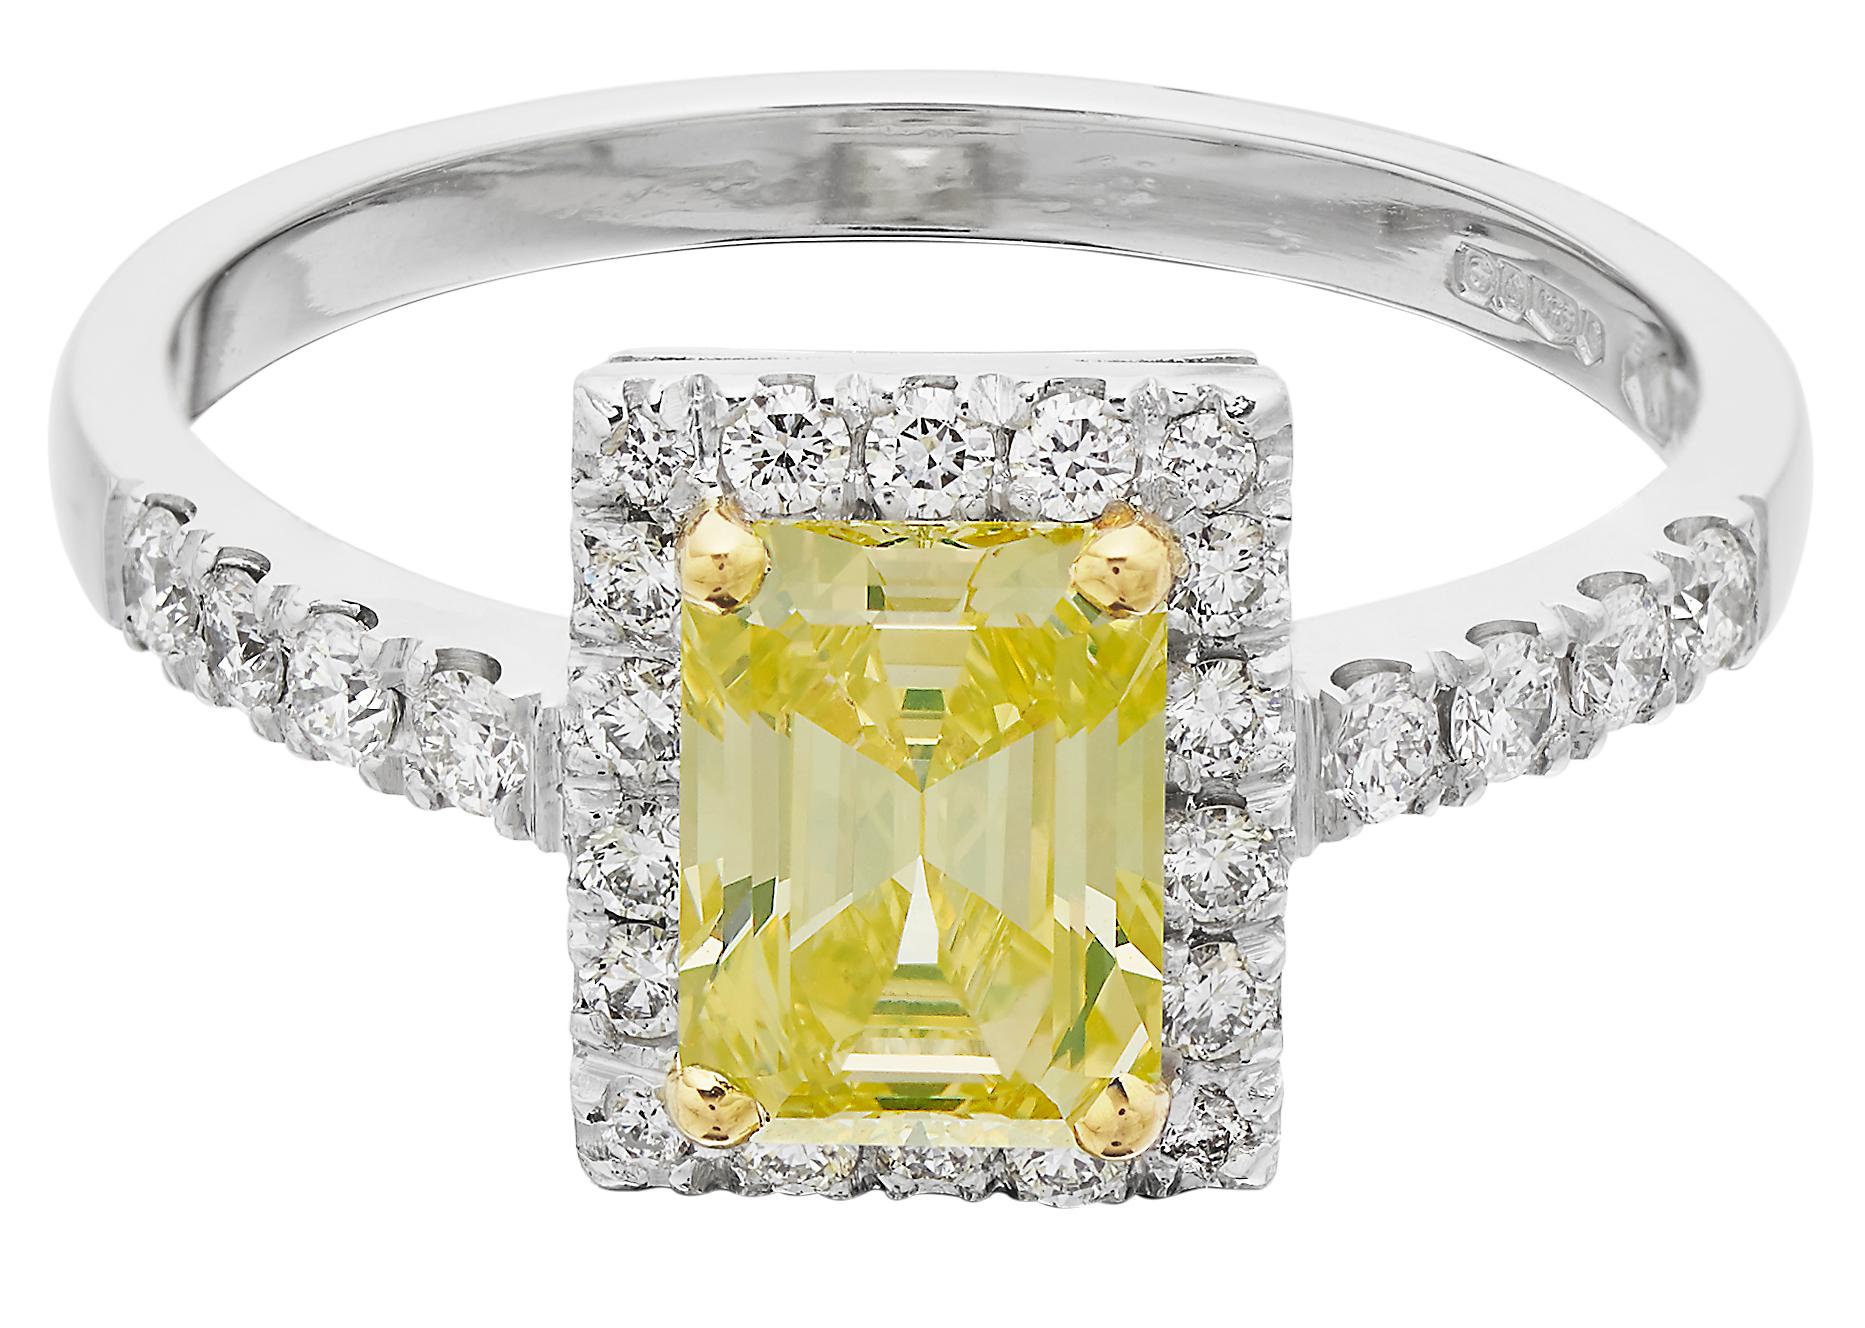 Diamond ring consisting of a stunning rectangular cut fancy intense yellow diamond captured in a yellow gold 4 claws within a frame of round brilliant white diamonds set on a white gold band with diamond shoulder. British hallmarked London platinum